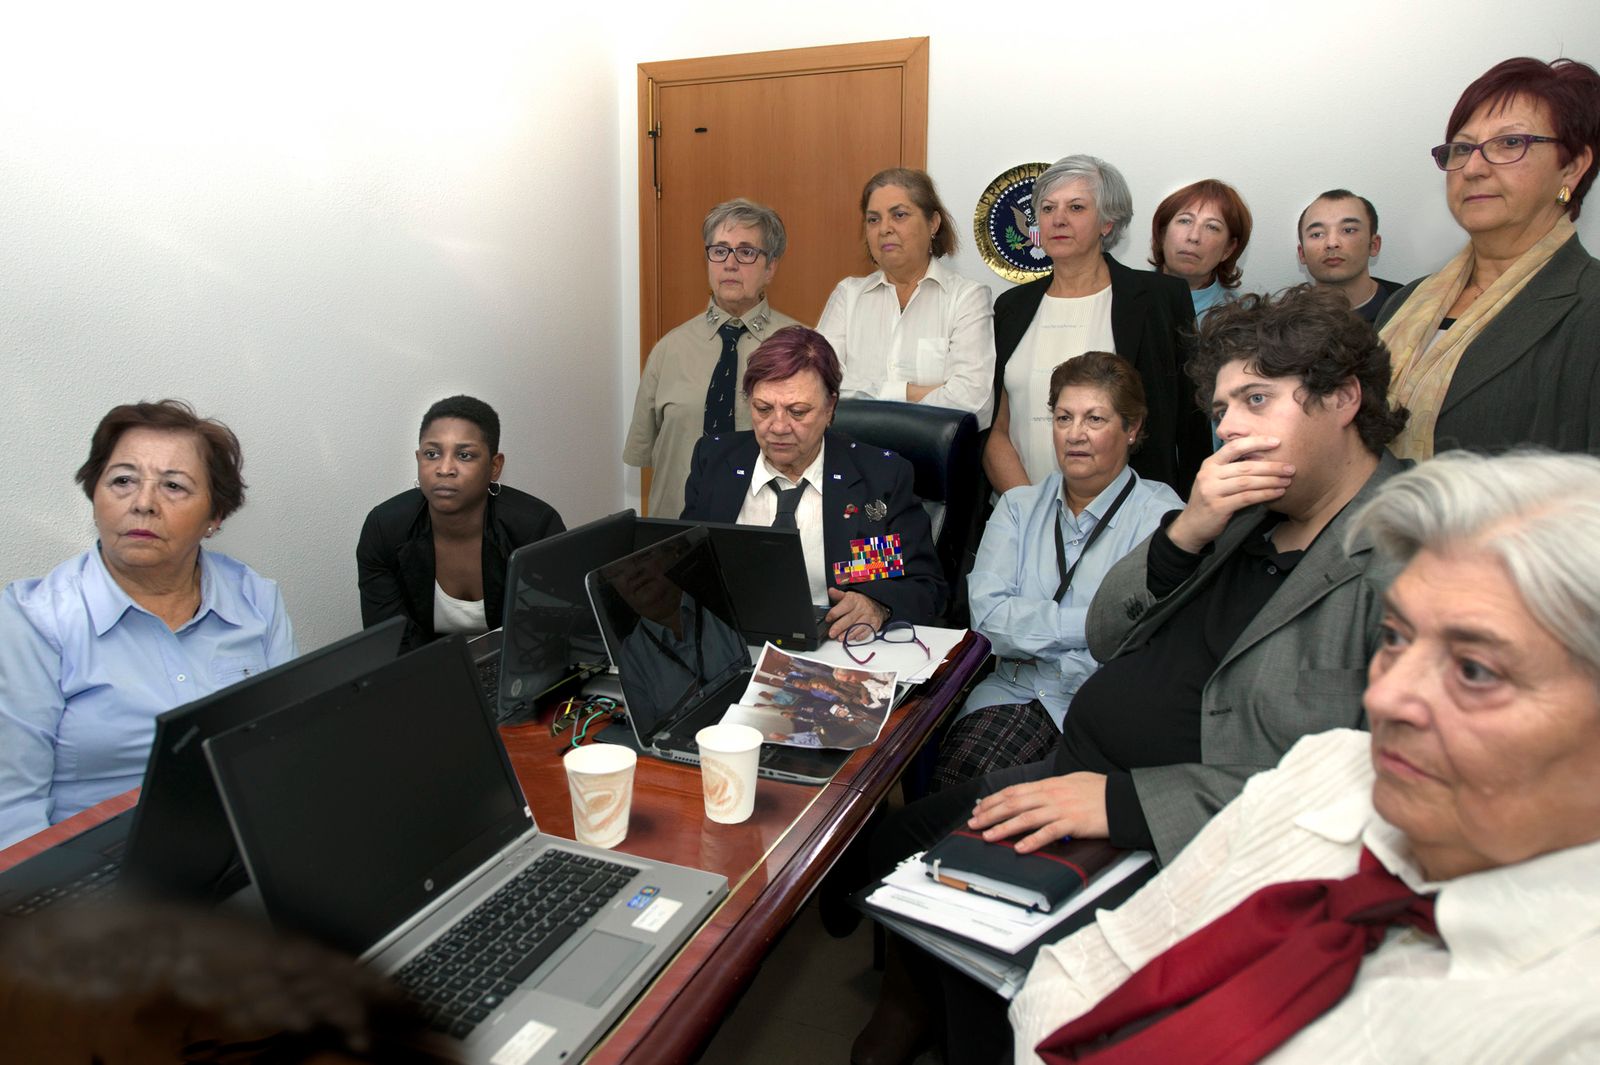 © Ana Amado - President Obama and his national security team in the White House Situation Room. 2011.